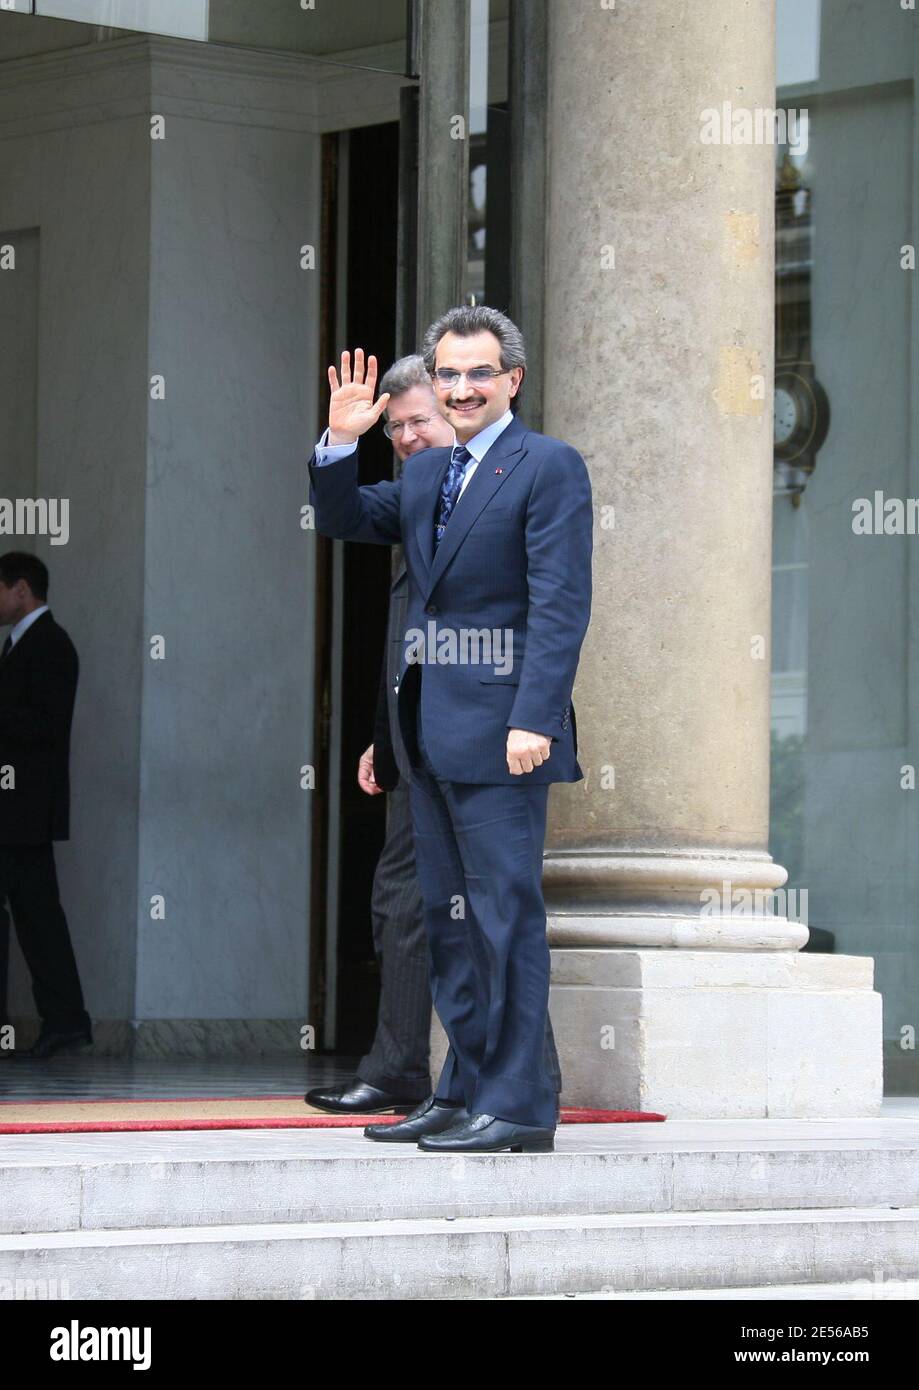 Saudi Prince Alwaleed Bin Talal Bin Abdulaziz Al Saud received by French President's diplomatic advisor and sherpa Jean-David Levitte at Elysee Palace in Paris, France on July 16, 2008. Photo by Denis Guignebourg/ABACAPRESS.COM Stock Photo